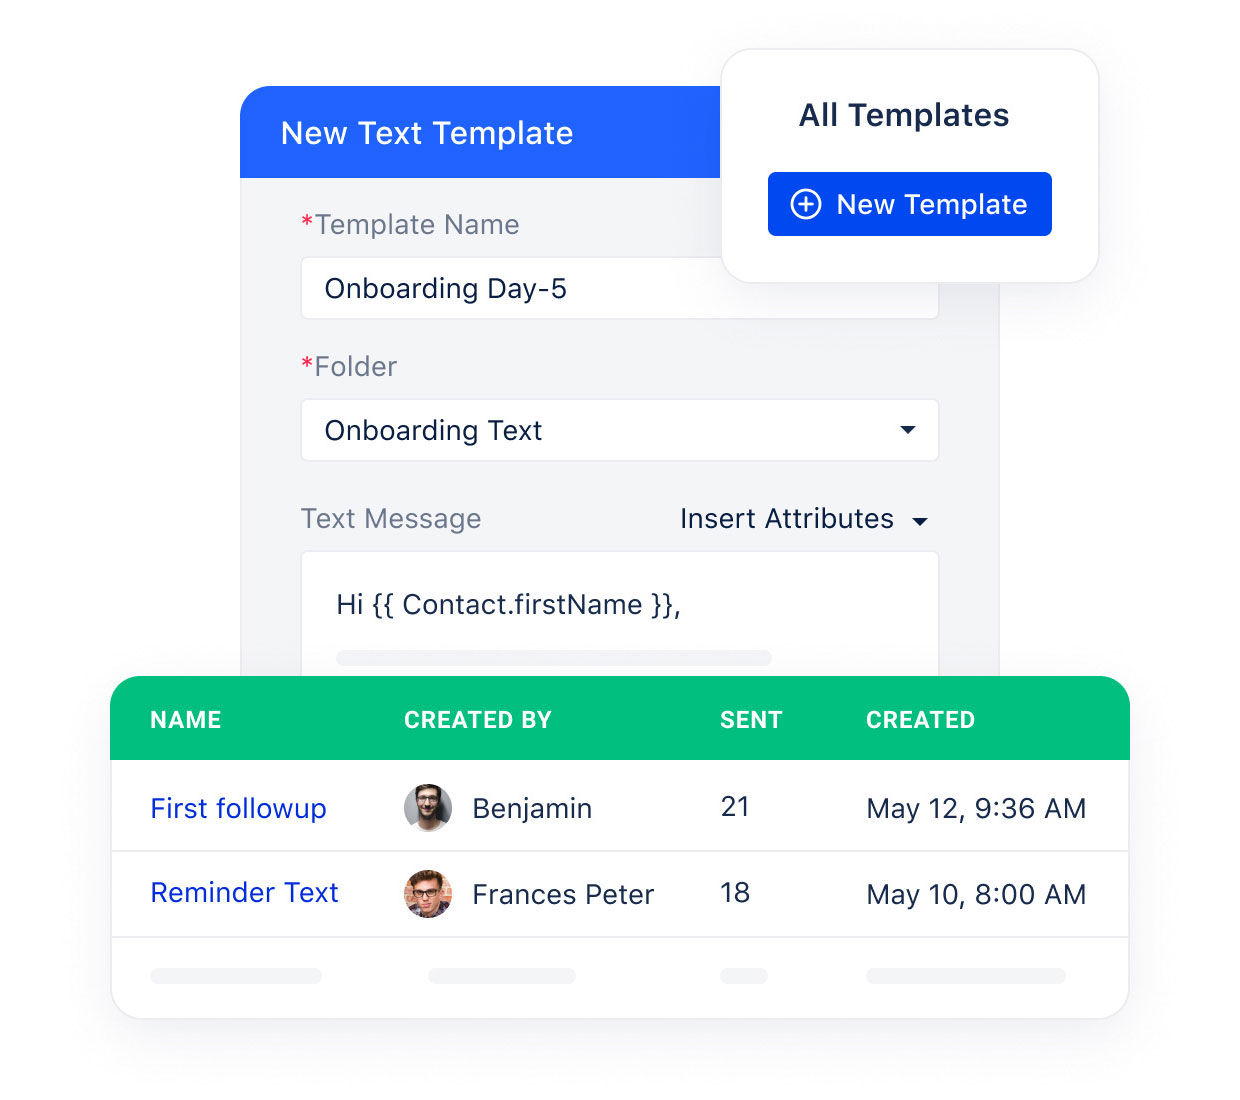 Work smart with pre-crafted templates